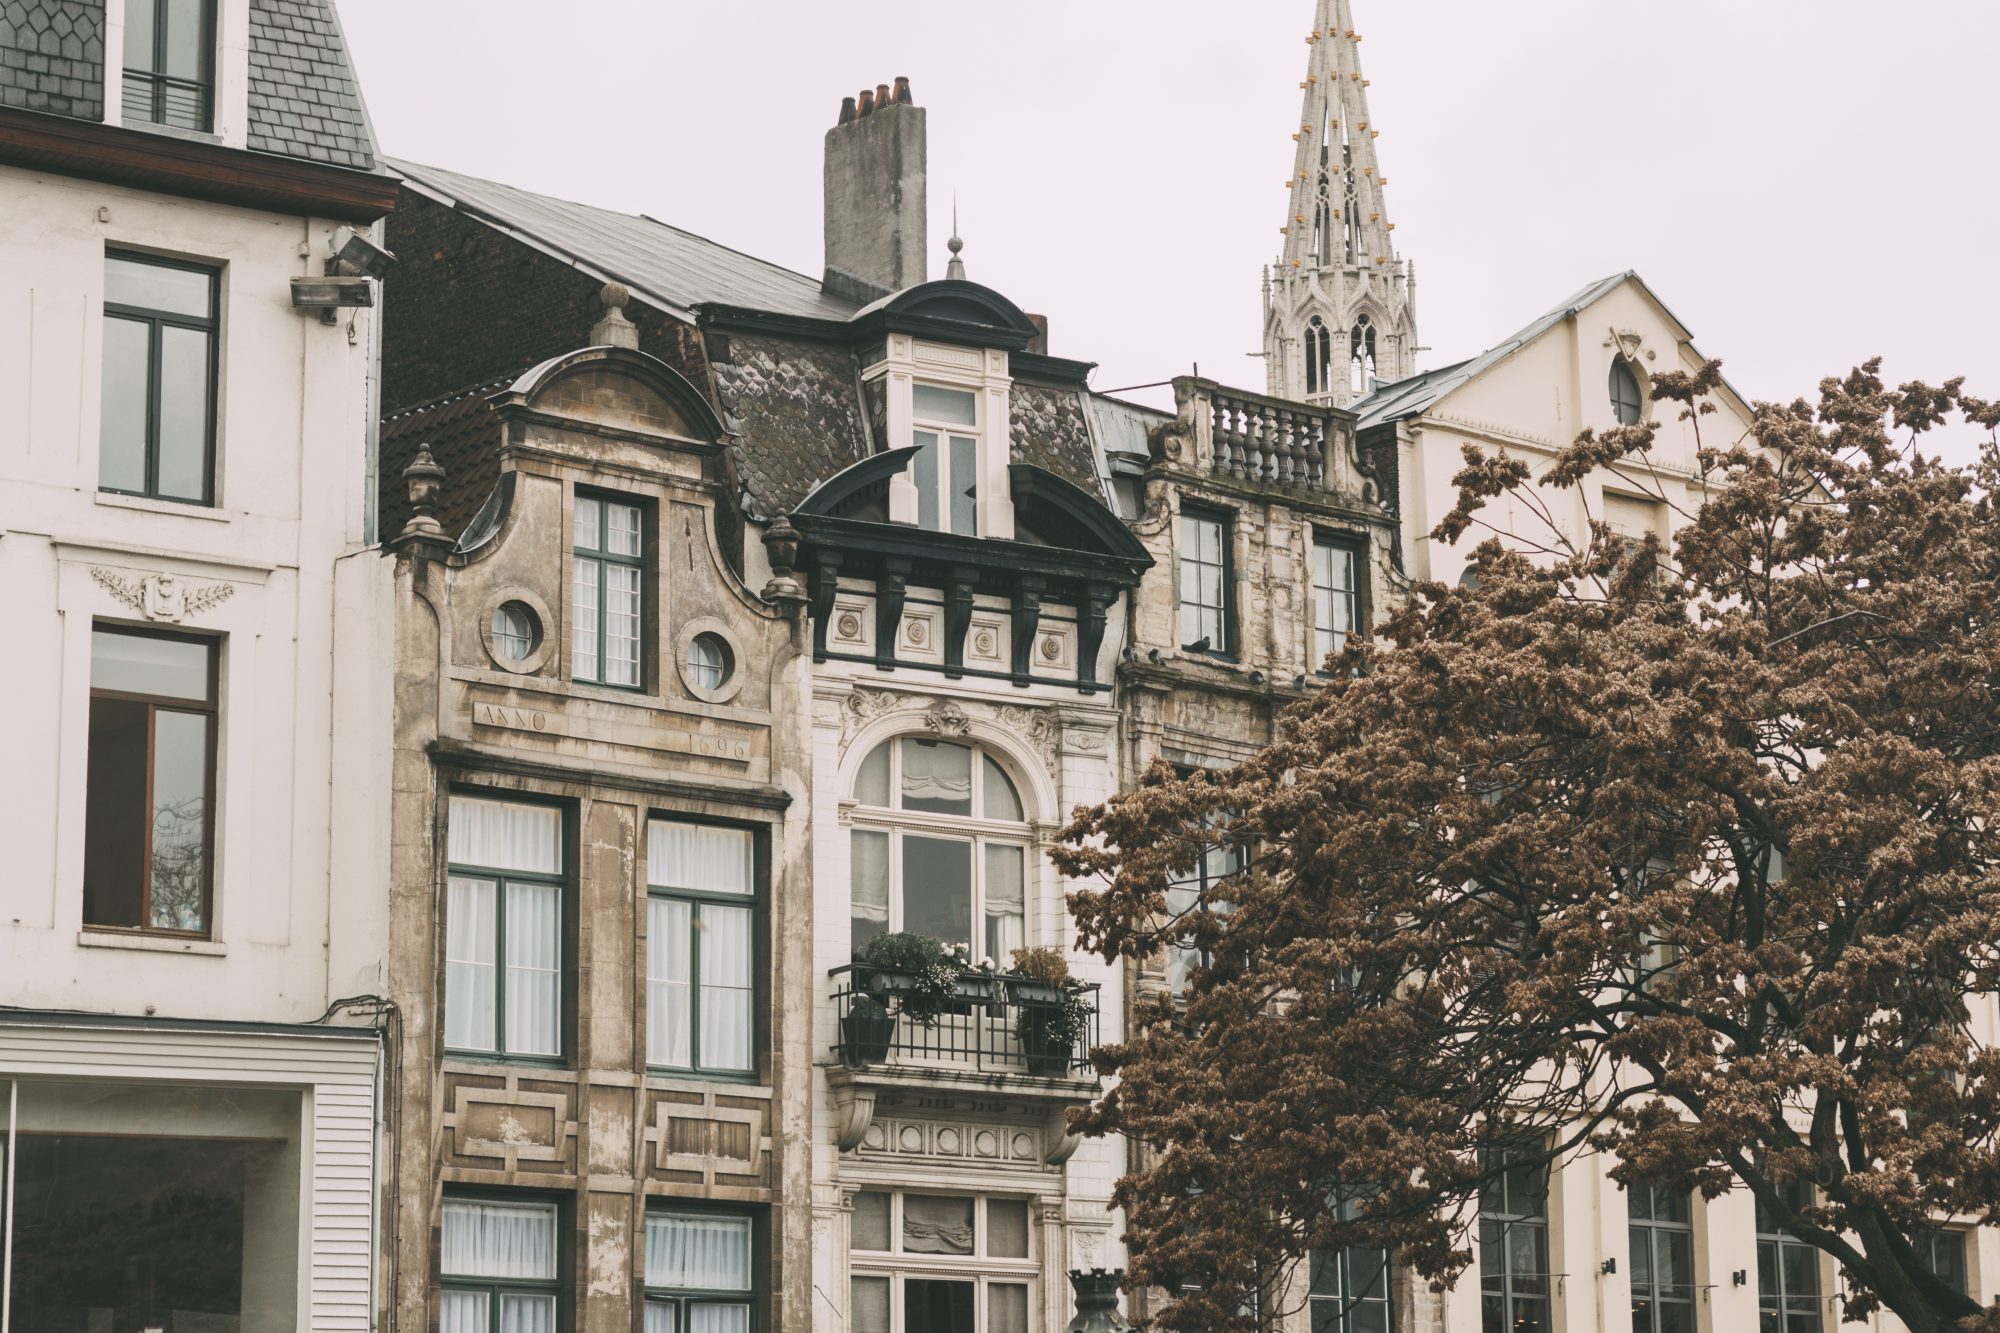 Architecture of Brussels